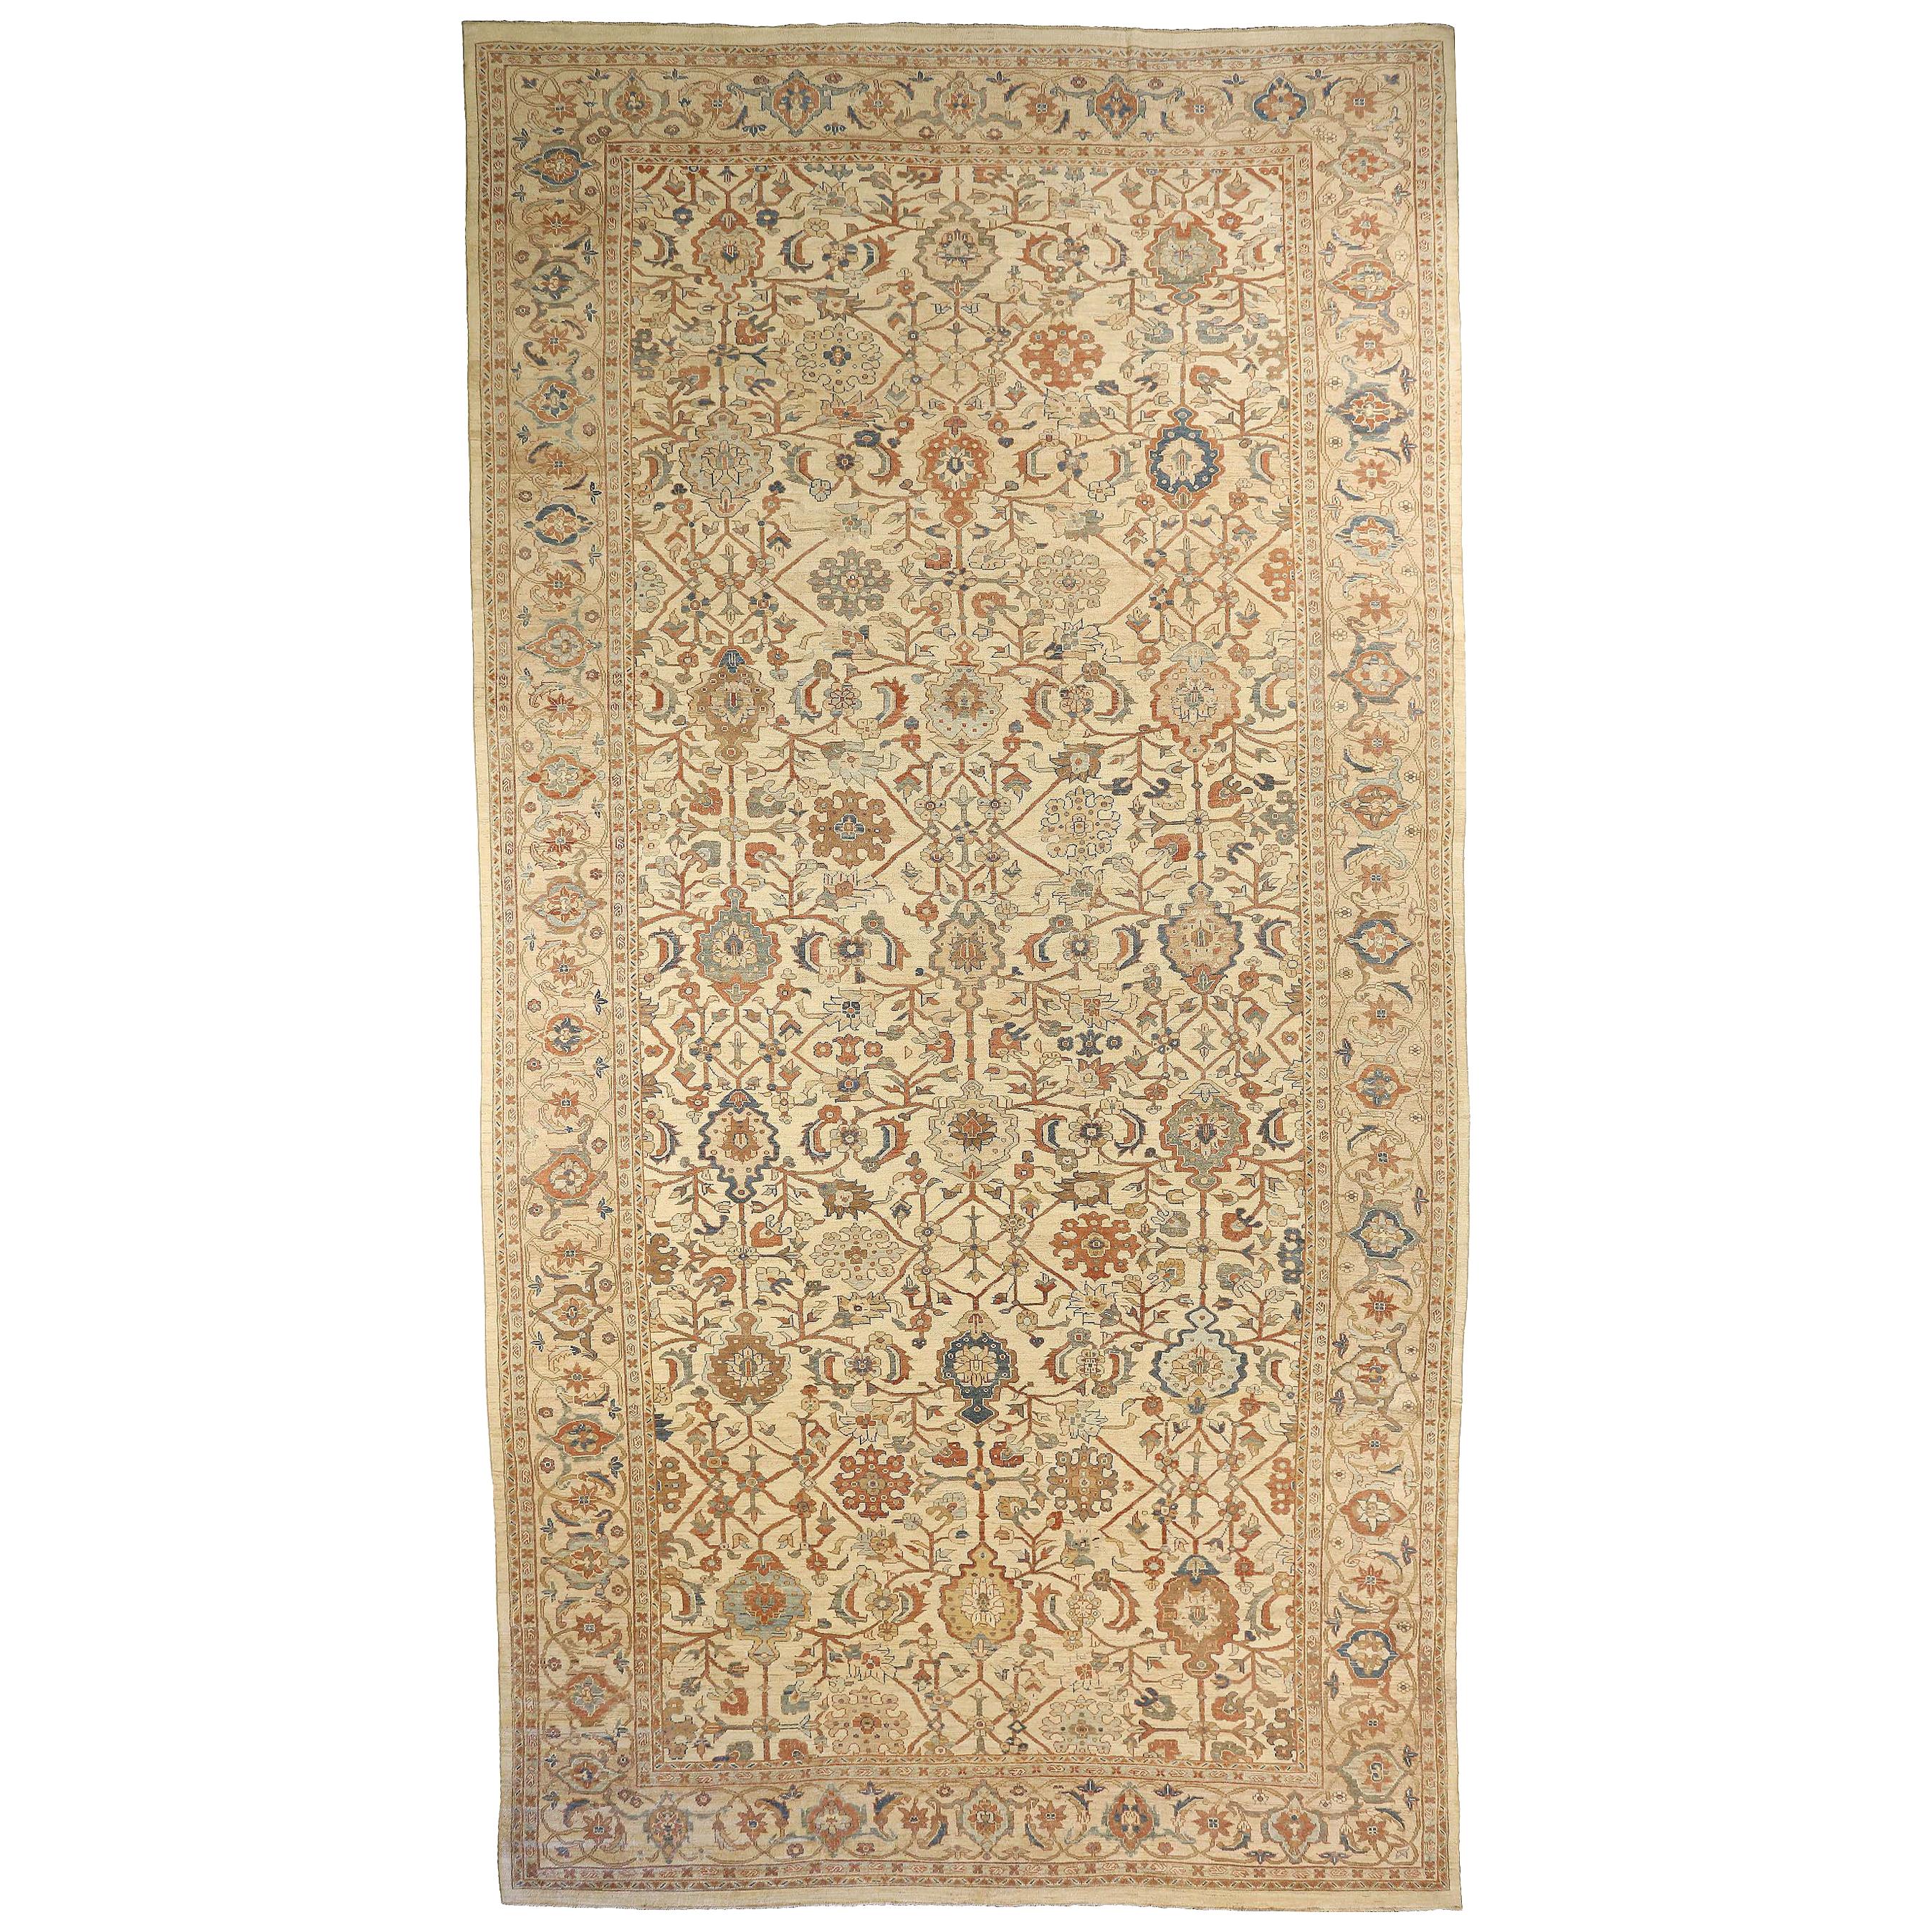 Oversized Persian Sultanabad Rug with Navy and Brown Botanical Details